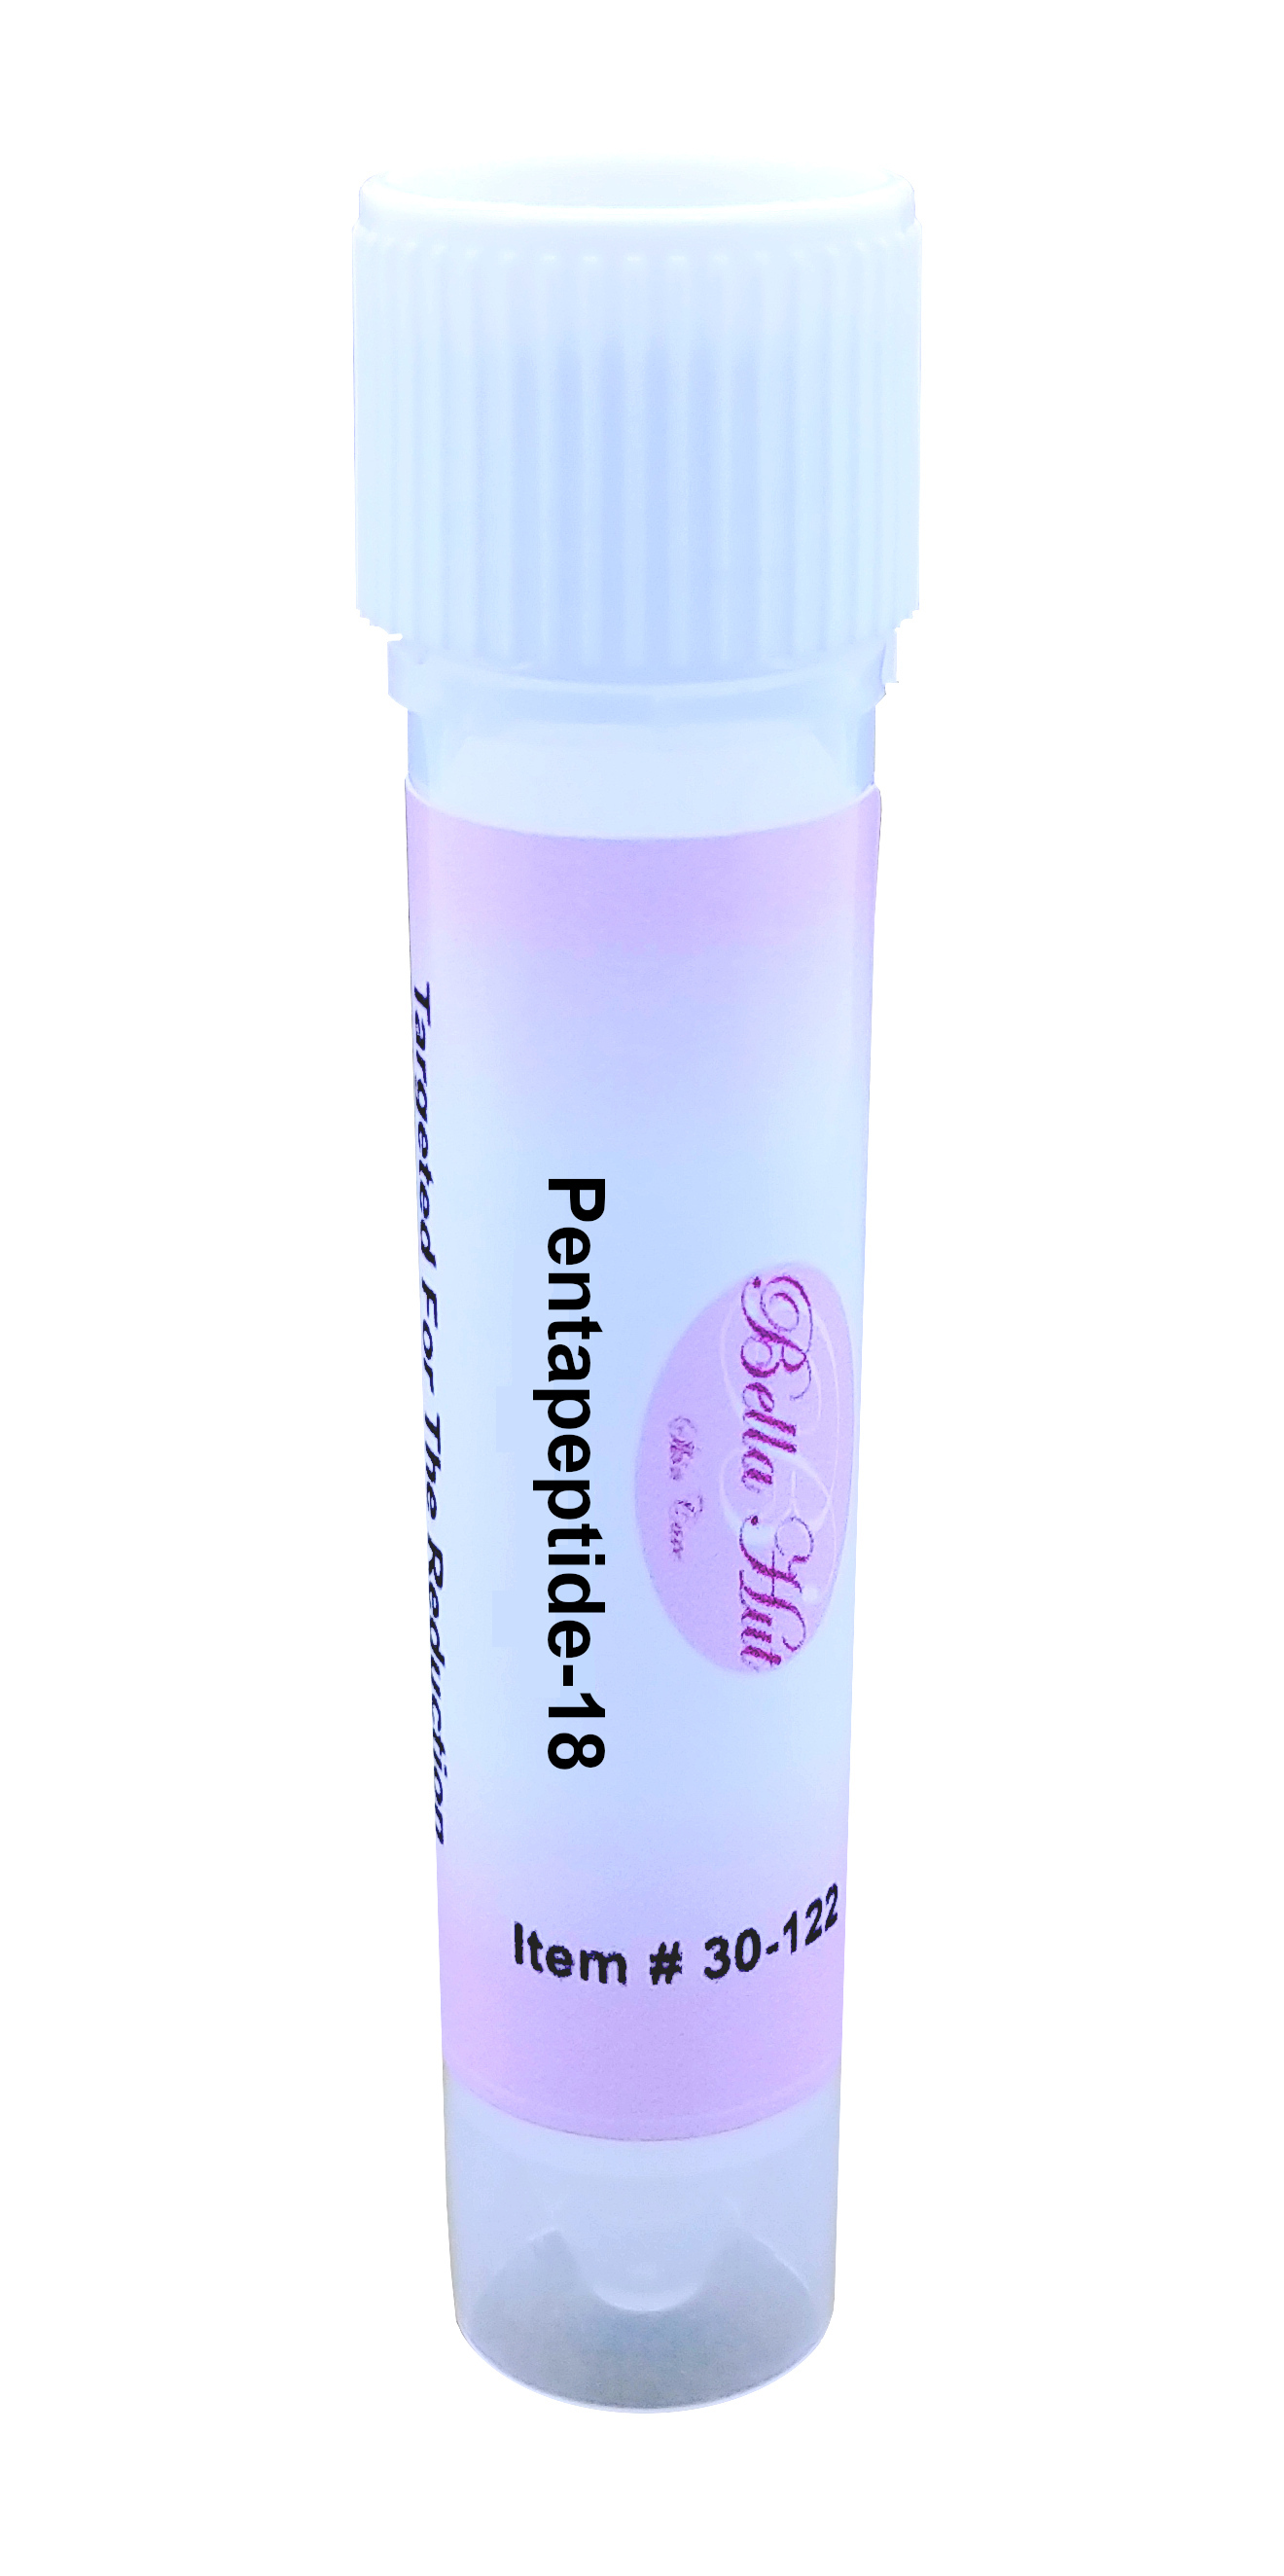 Pentapeptide-18 peptide additive for mixing cream or serum